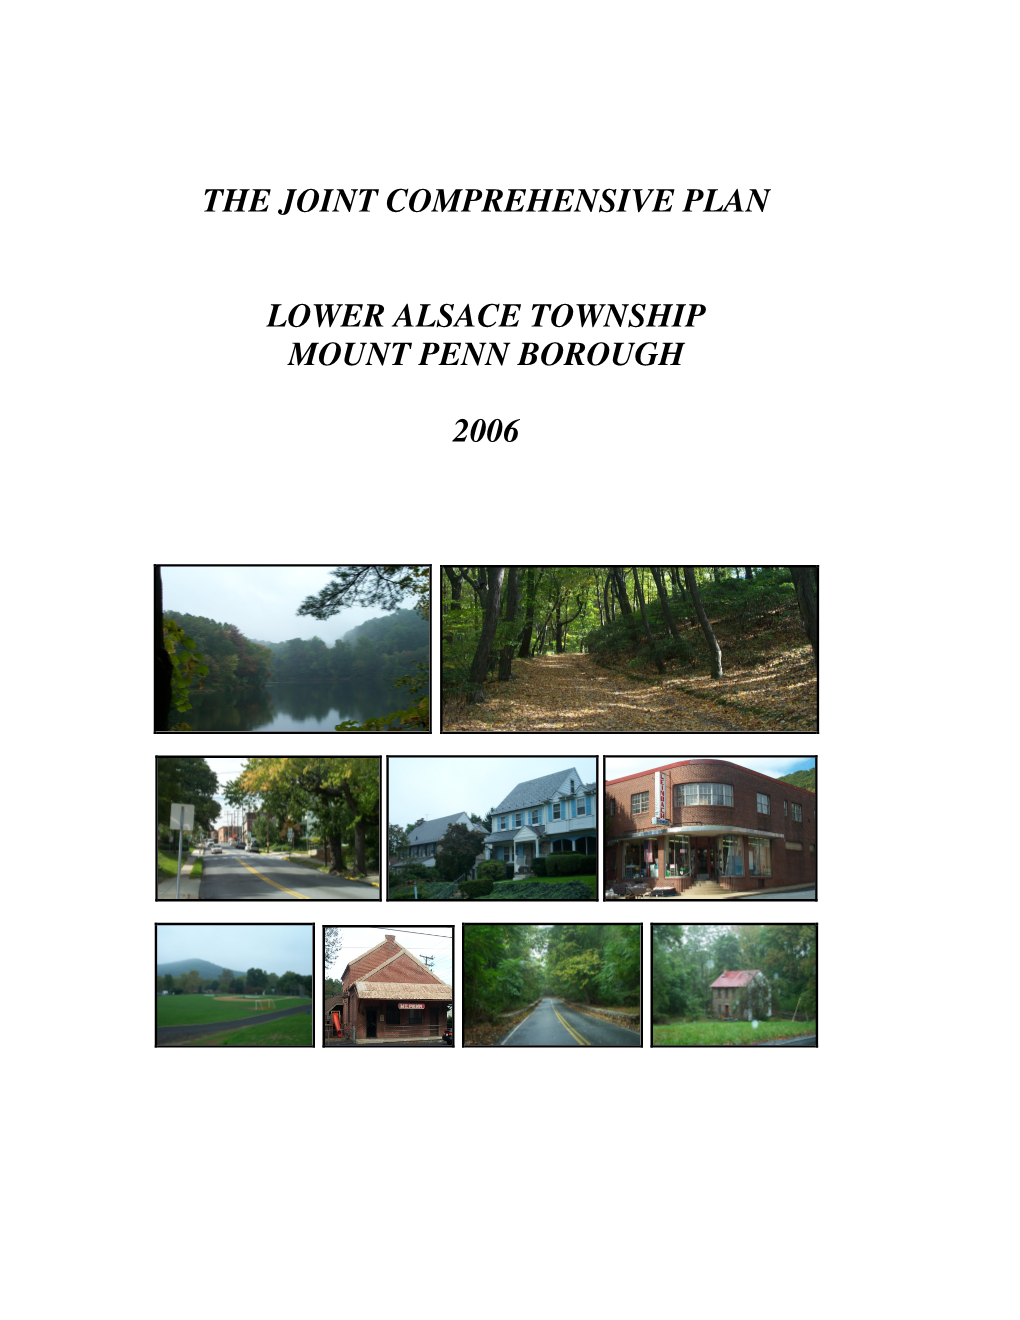 The Joint Comprehensive Plan Lower Alsace Township